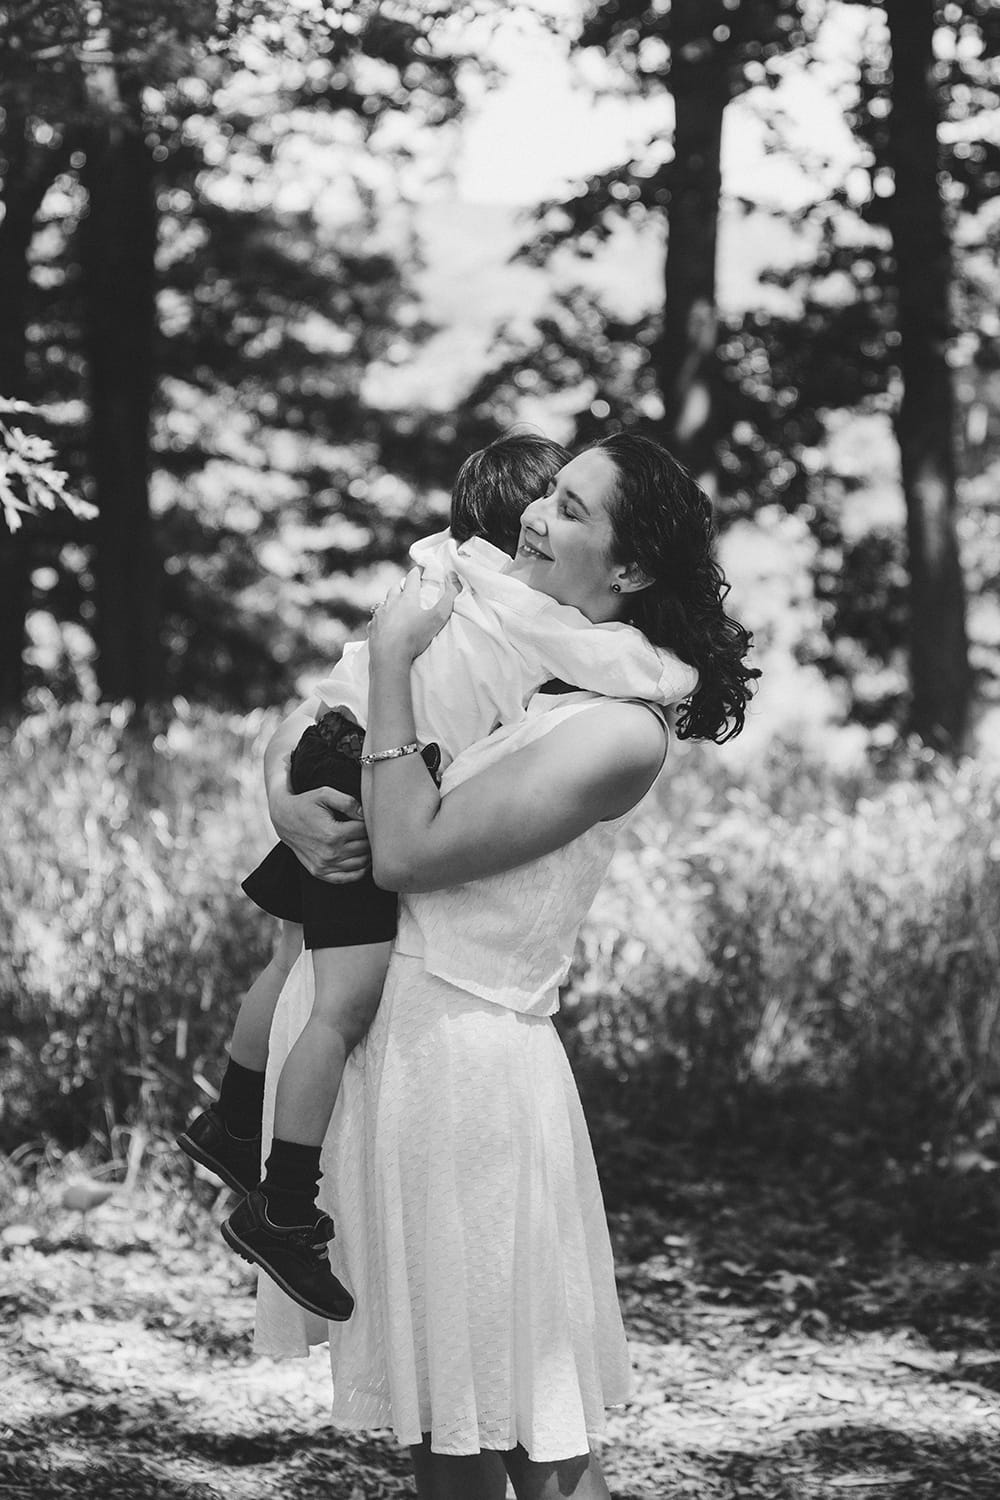 This lifestyle portrait of a mother hugging her son in the park is one of the best family photographs of 2016